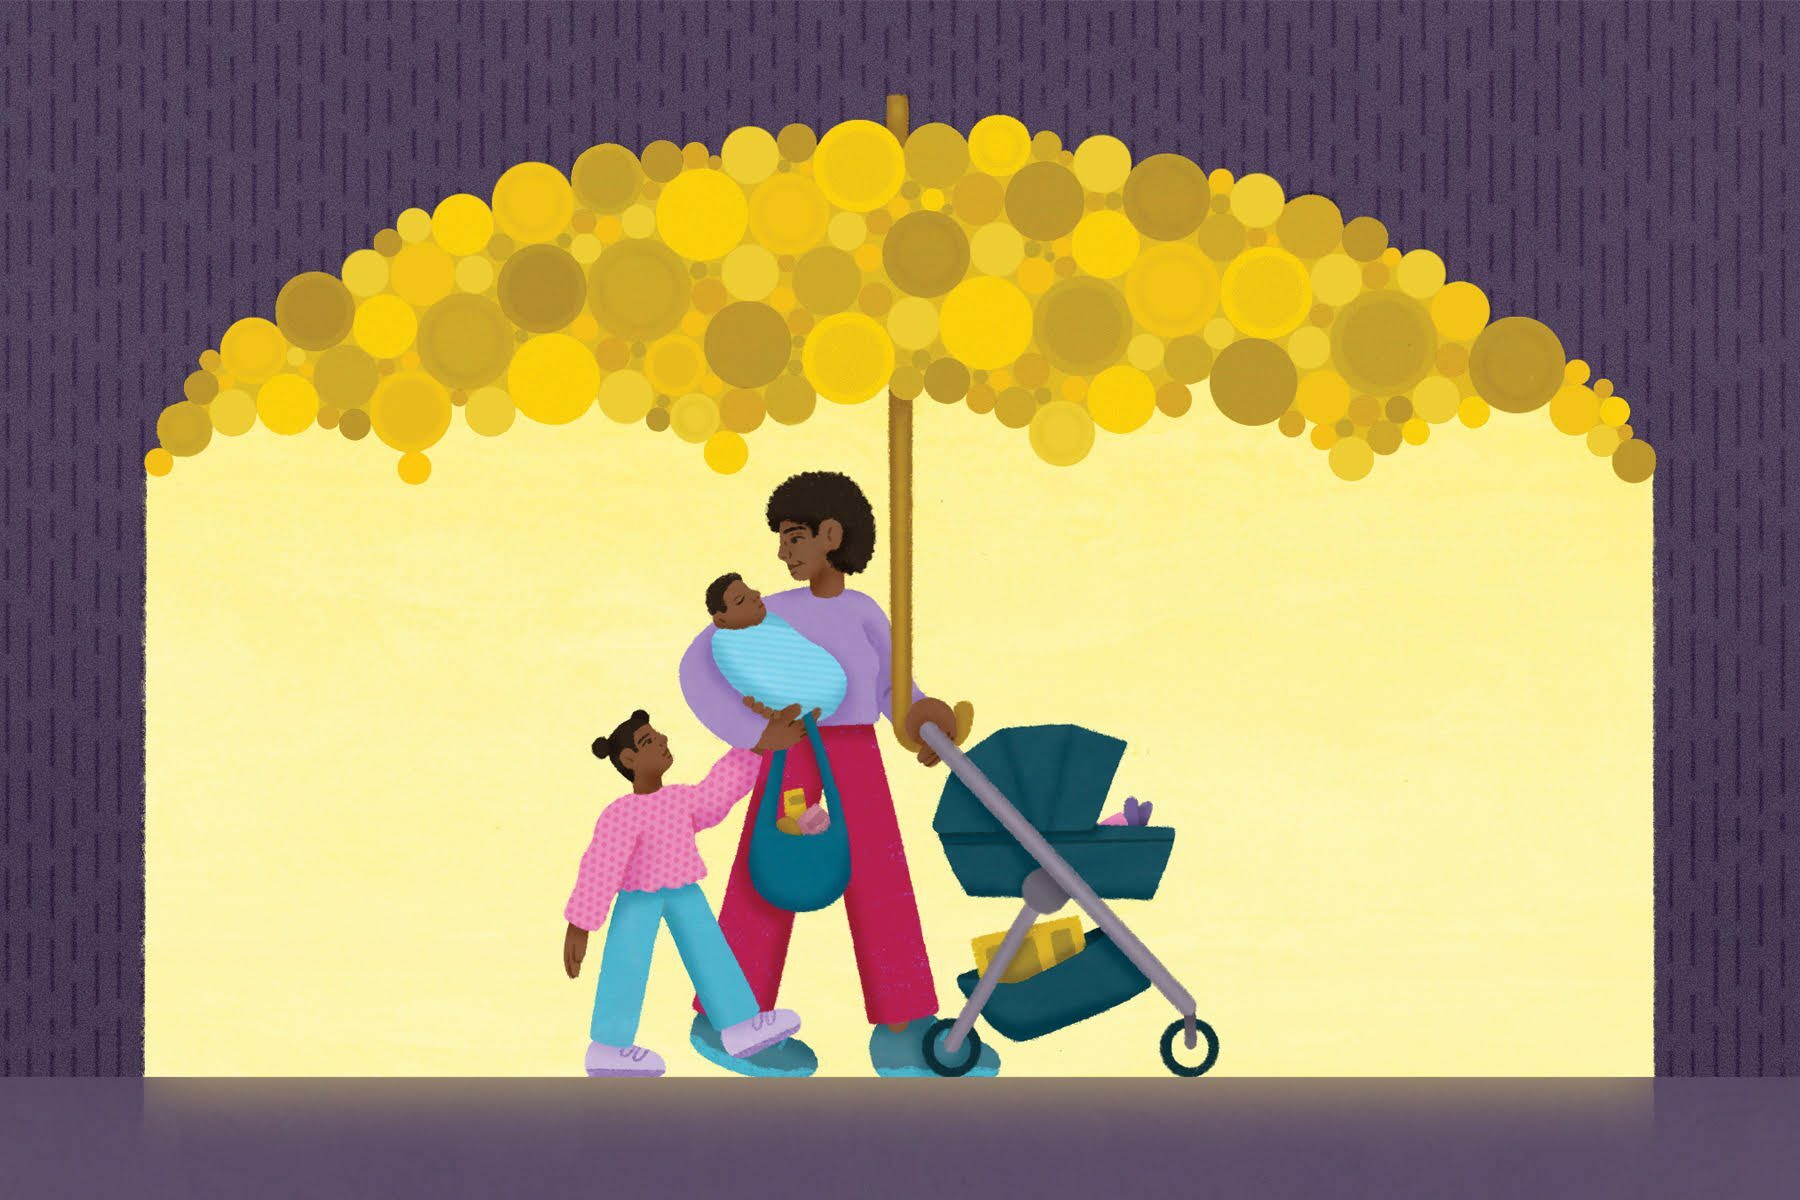 A mother walking with her children underneath an umbrella made of coins.